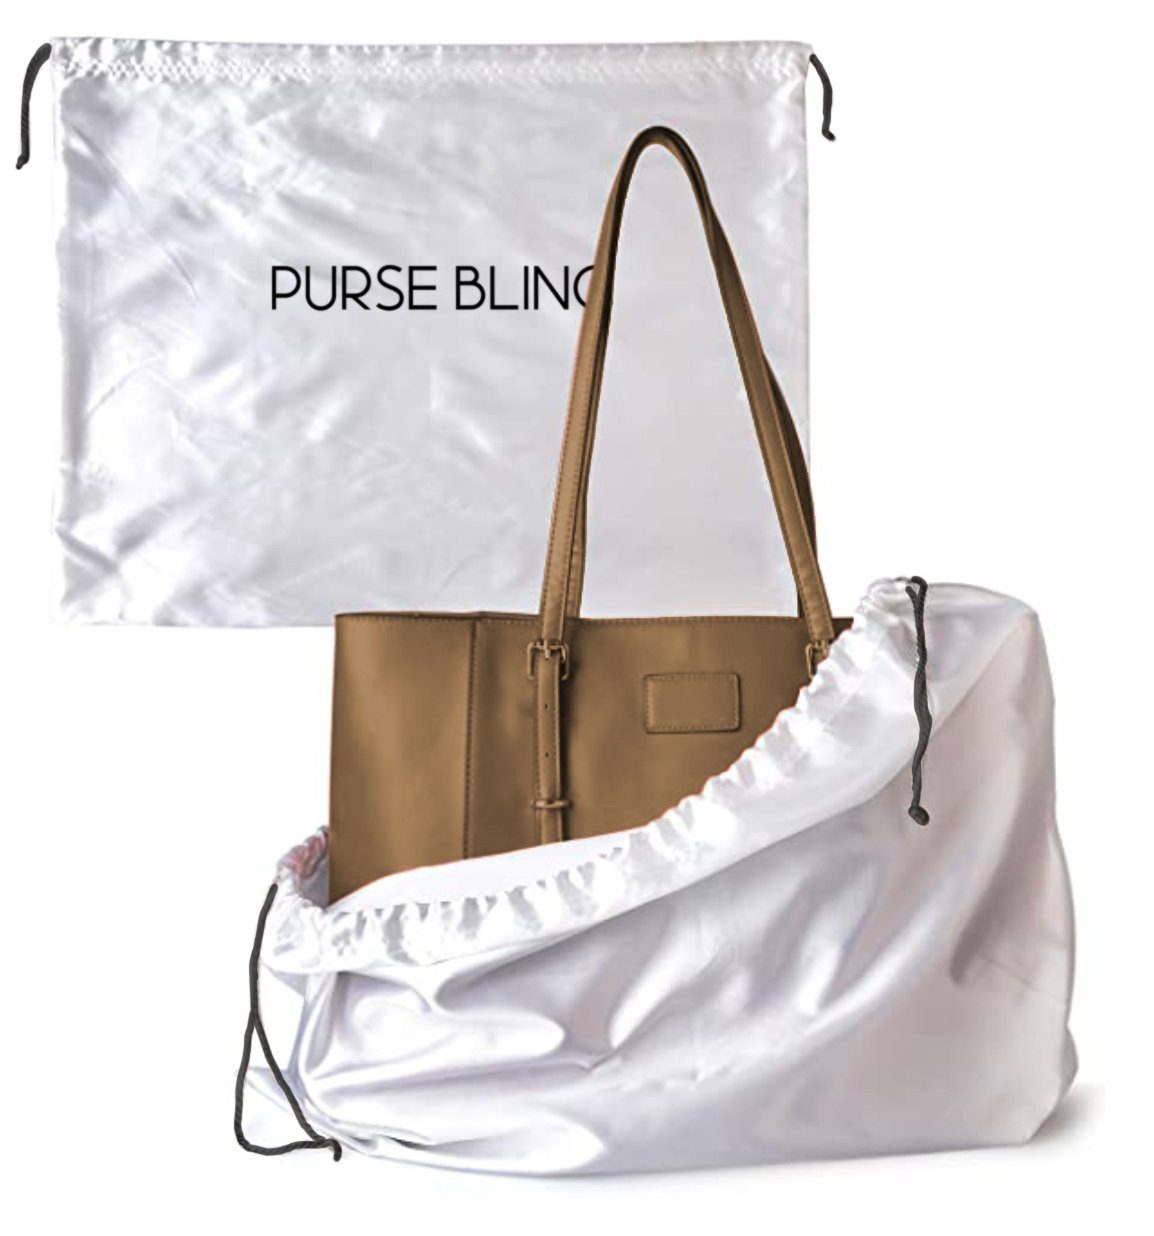 7 Tips on How To Protect Your Designer Bags - Purse Bling